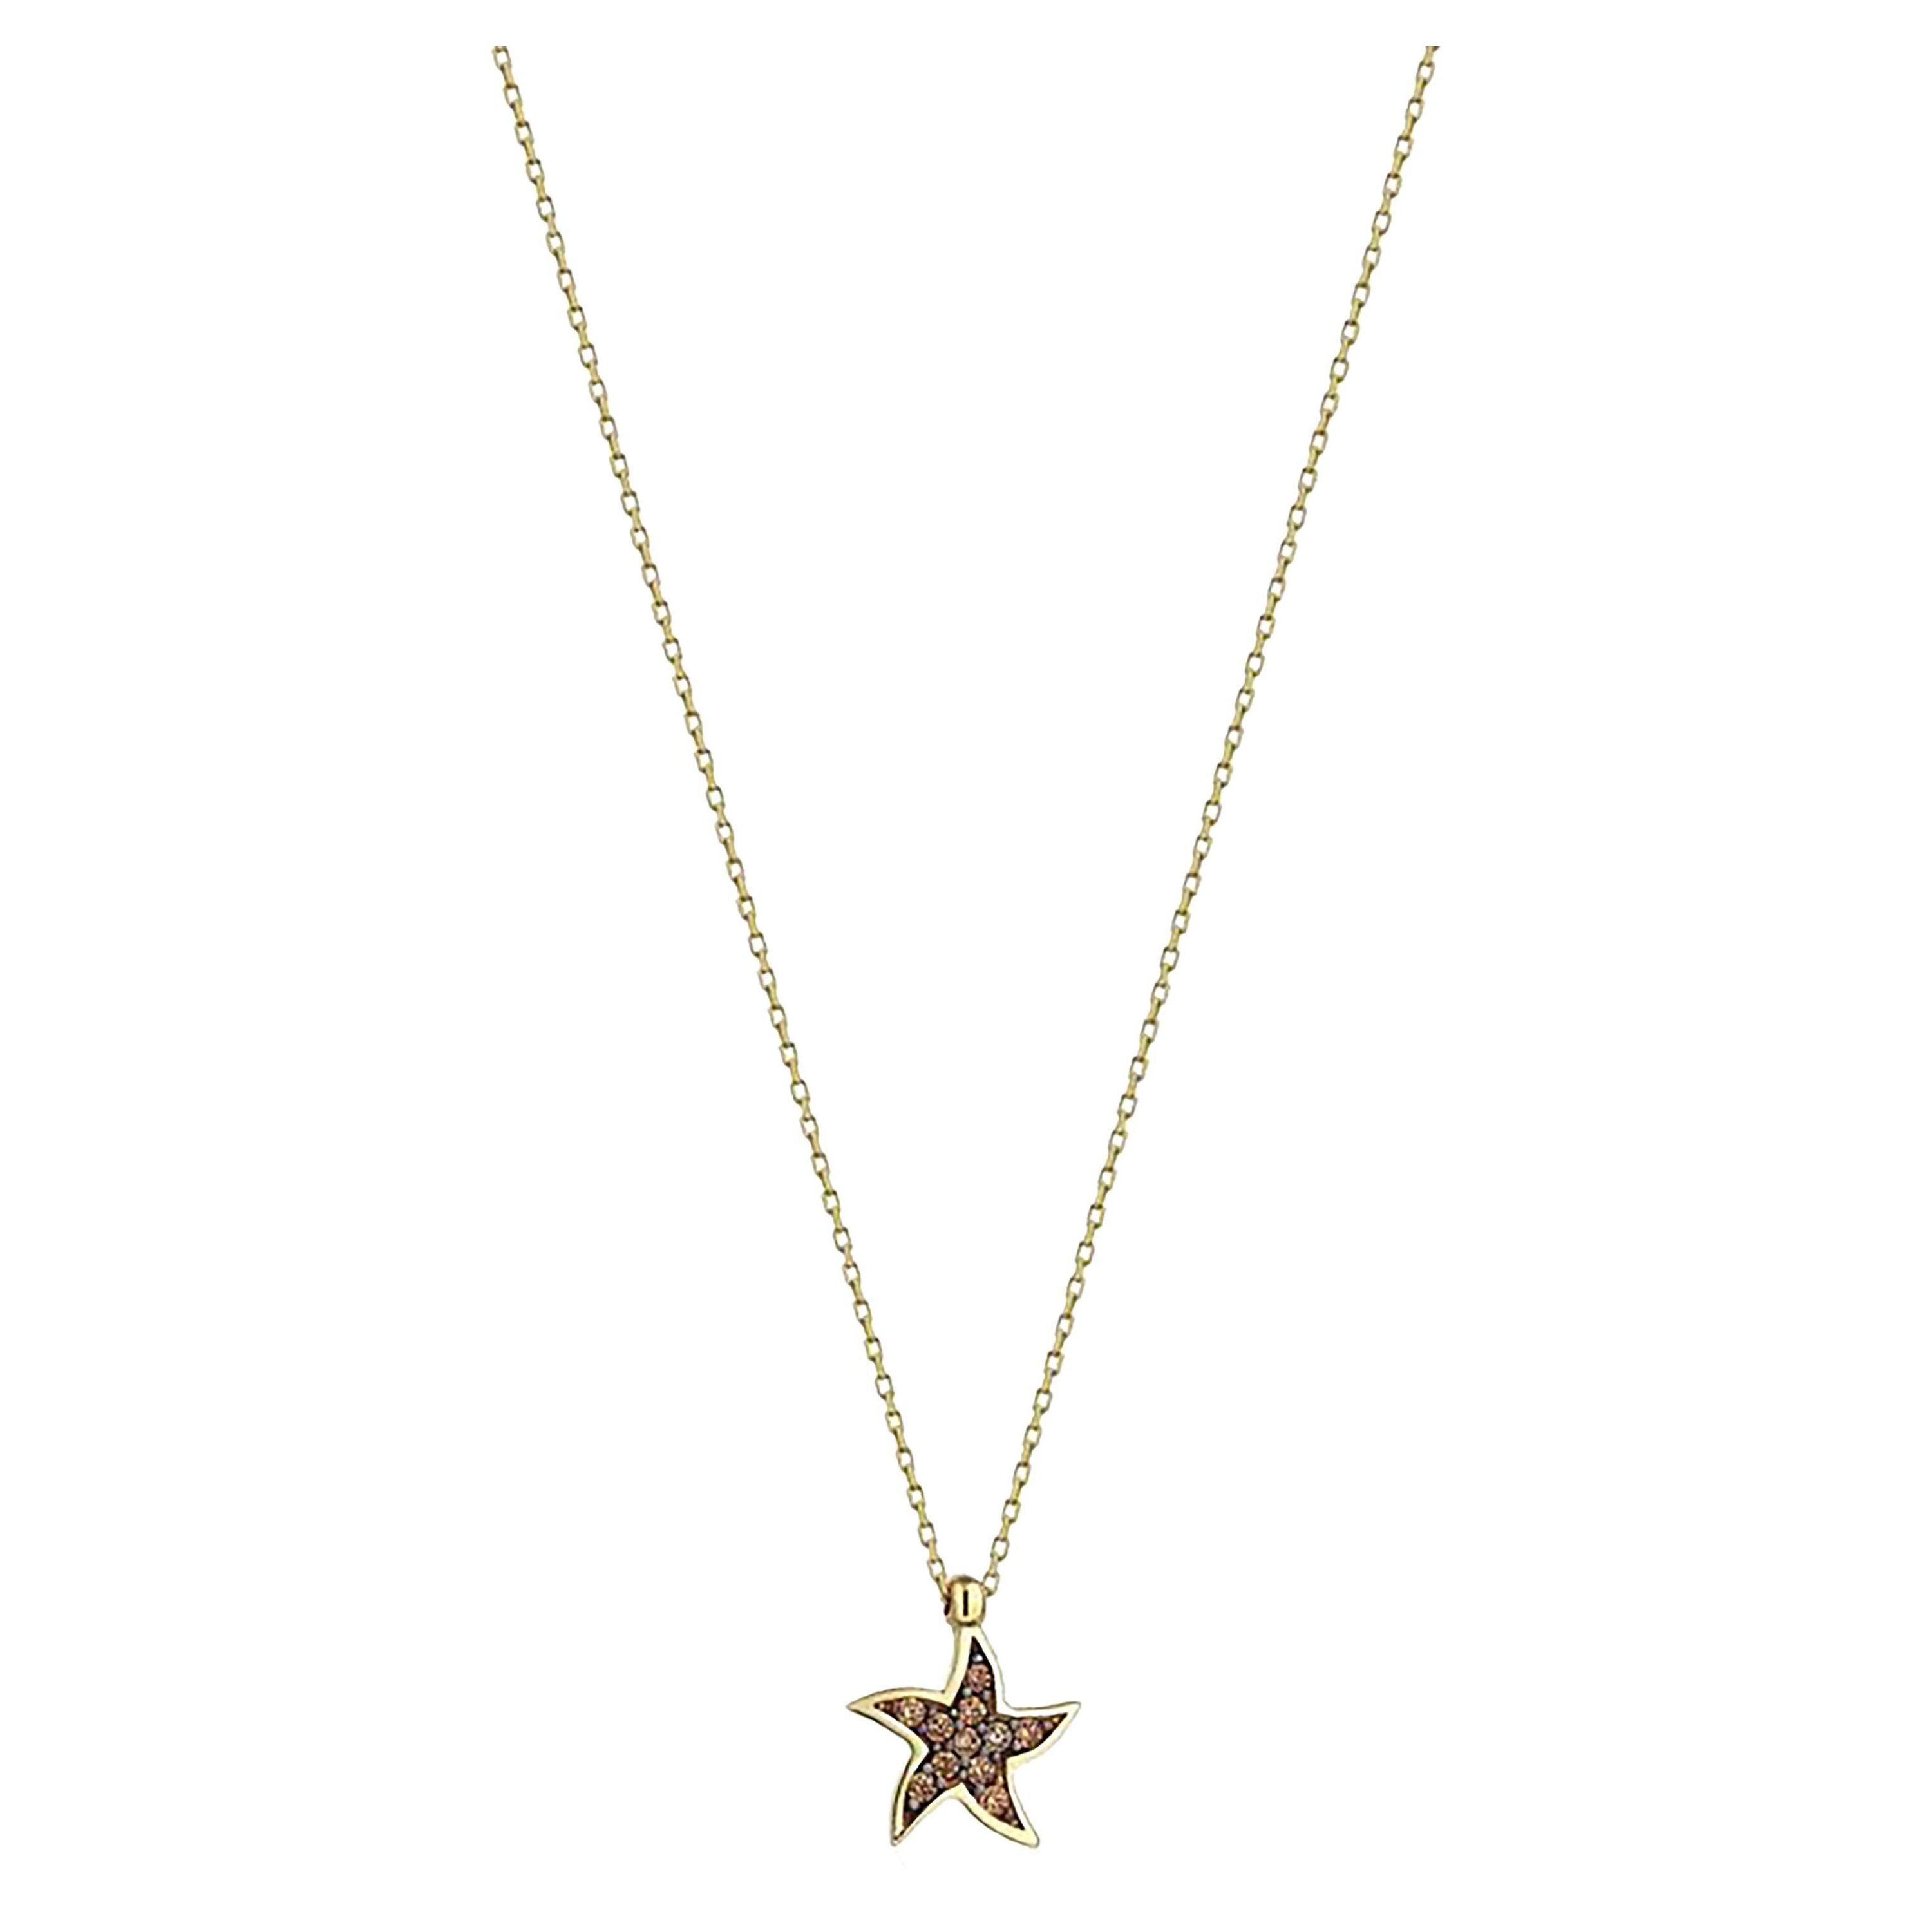 14K Gold Starfish Necklace. Solid Gold Starfish Necklace, Star Necklace